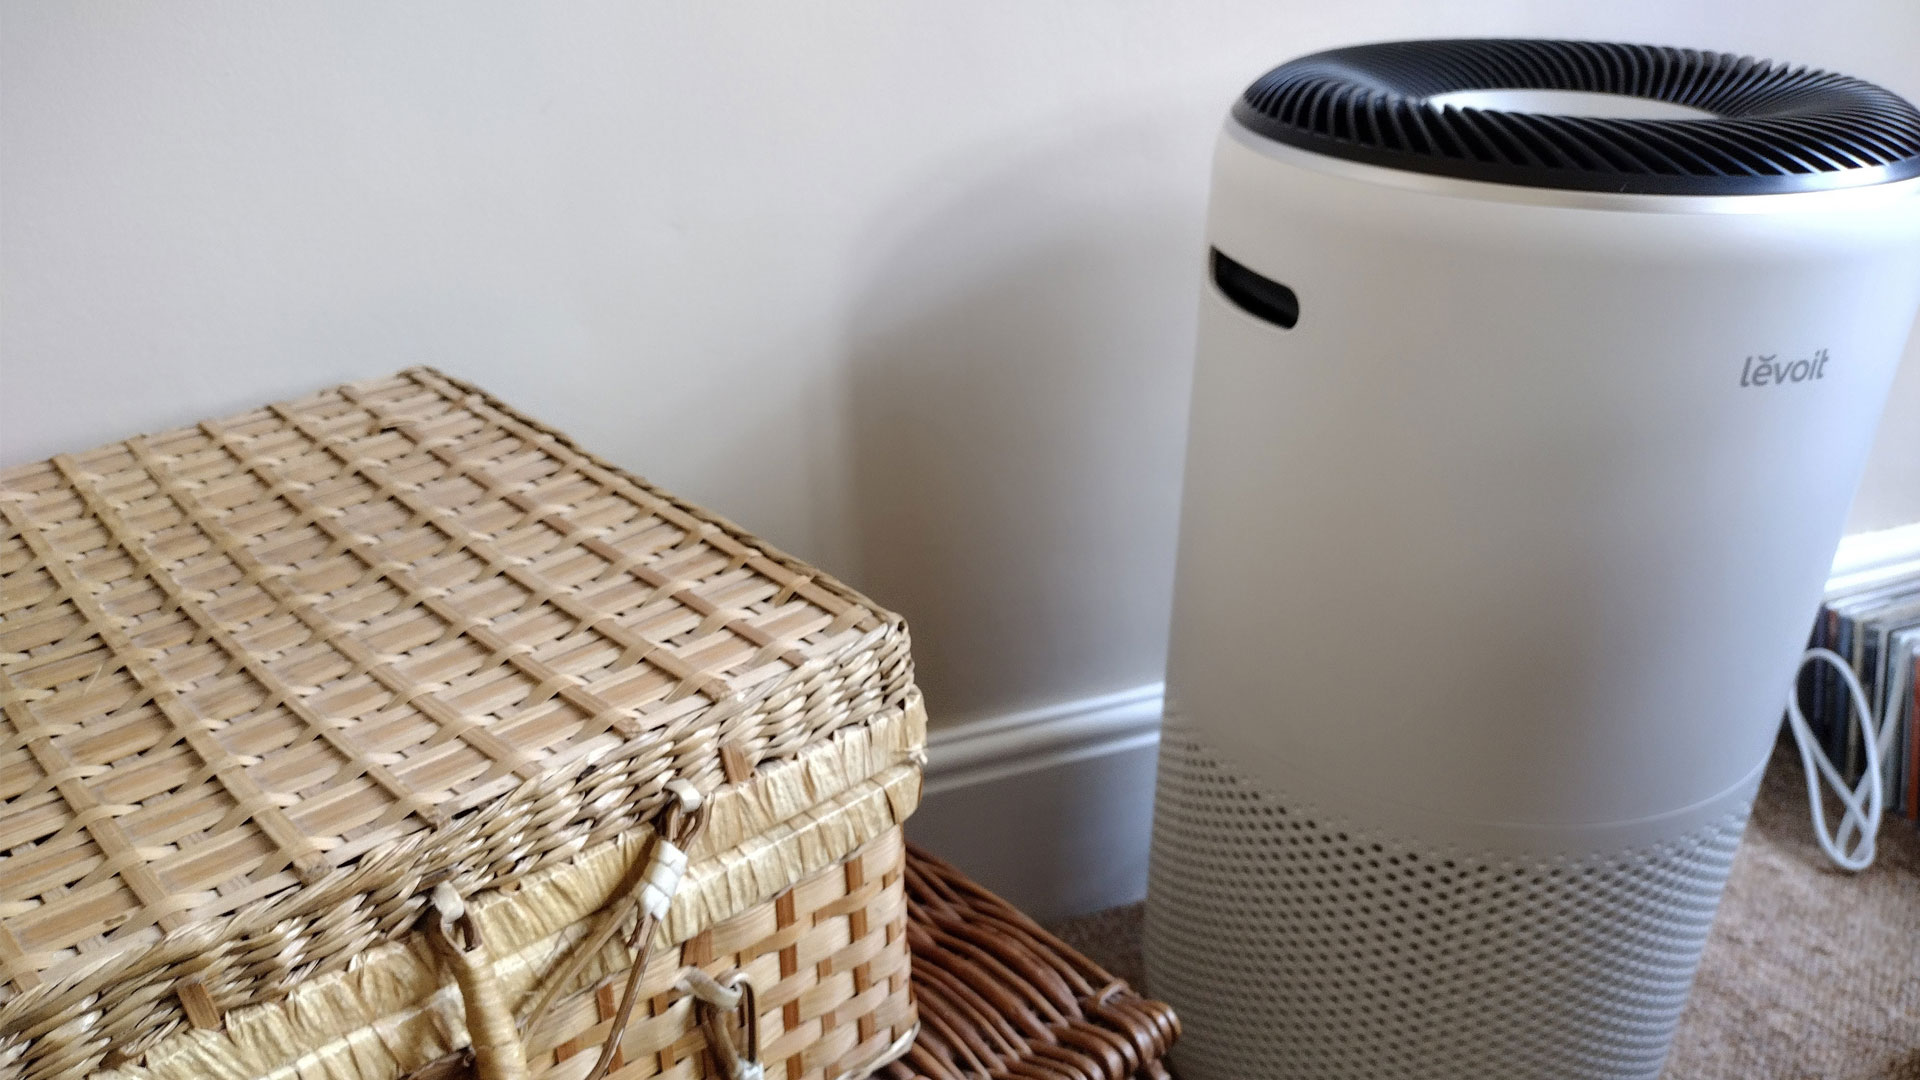 Levoit 400S air purifier - the best air purifier we tested